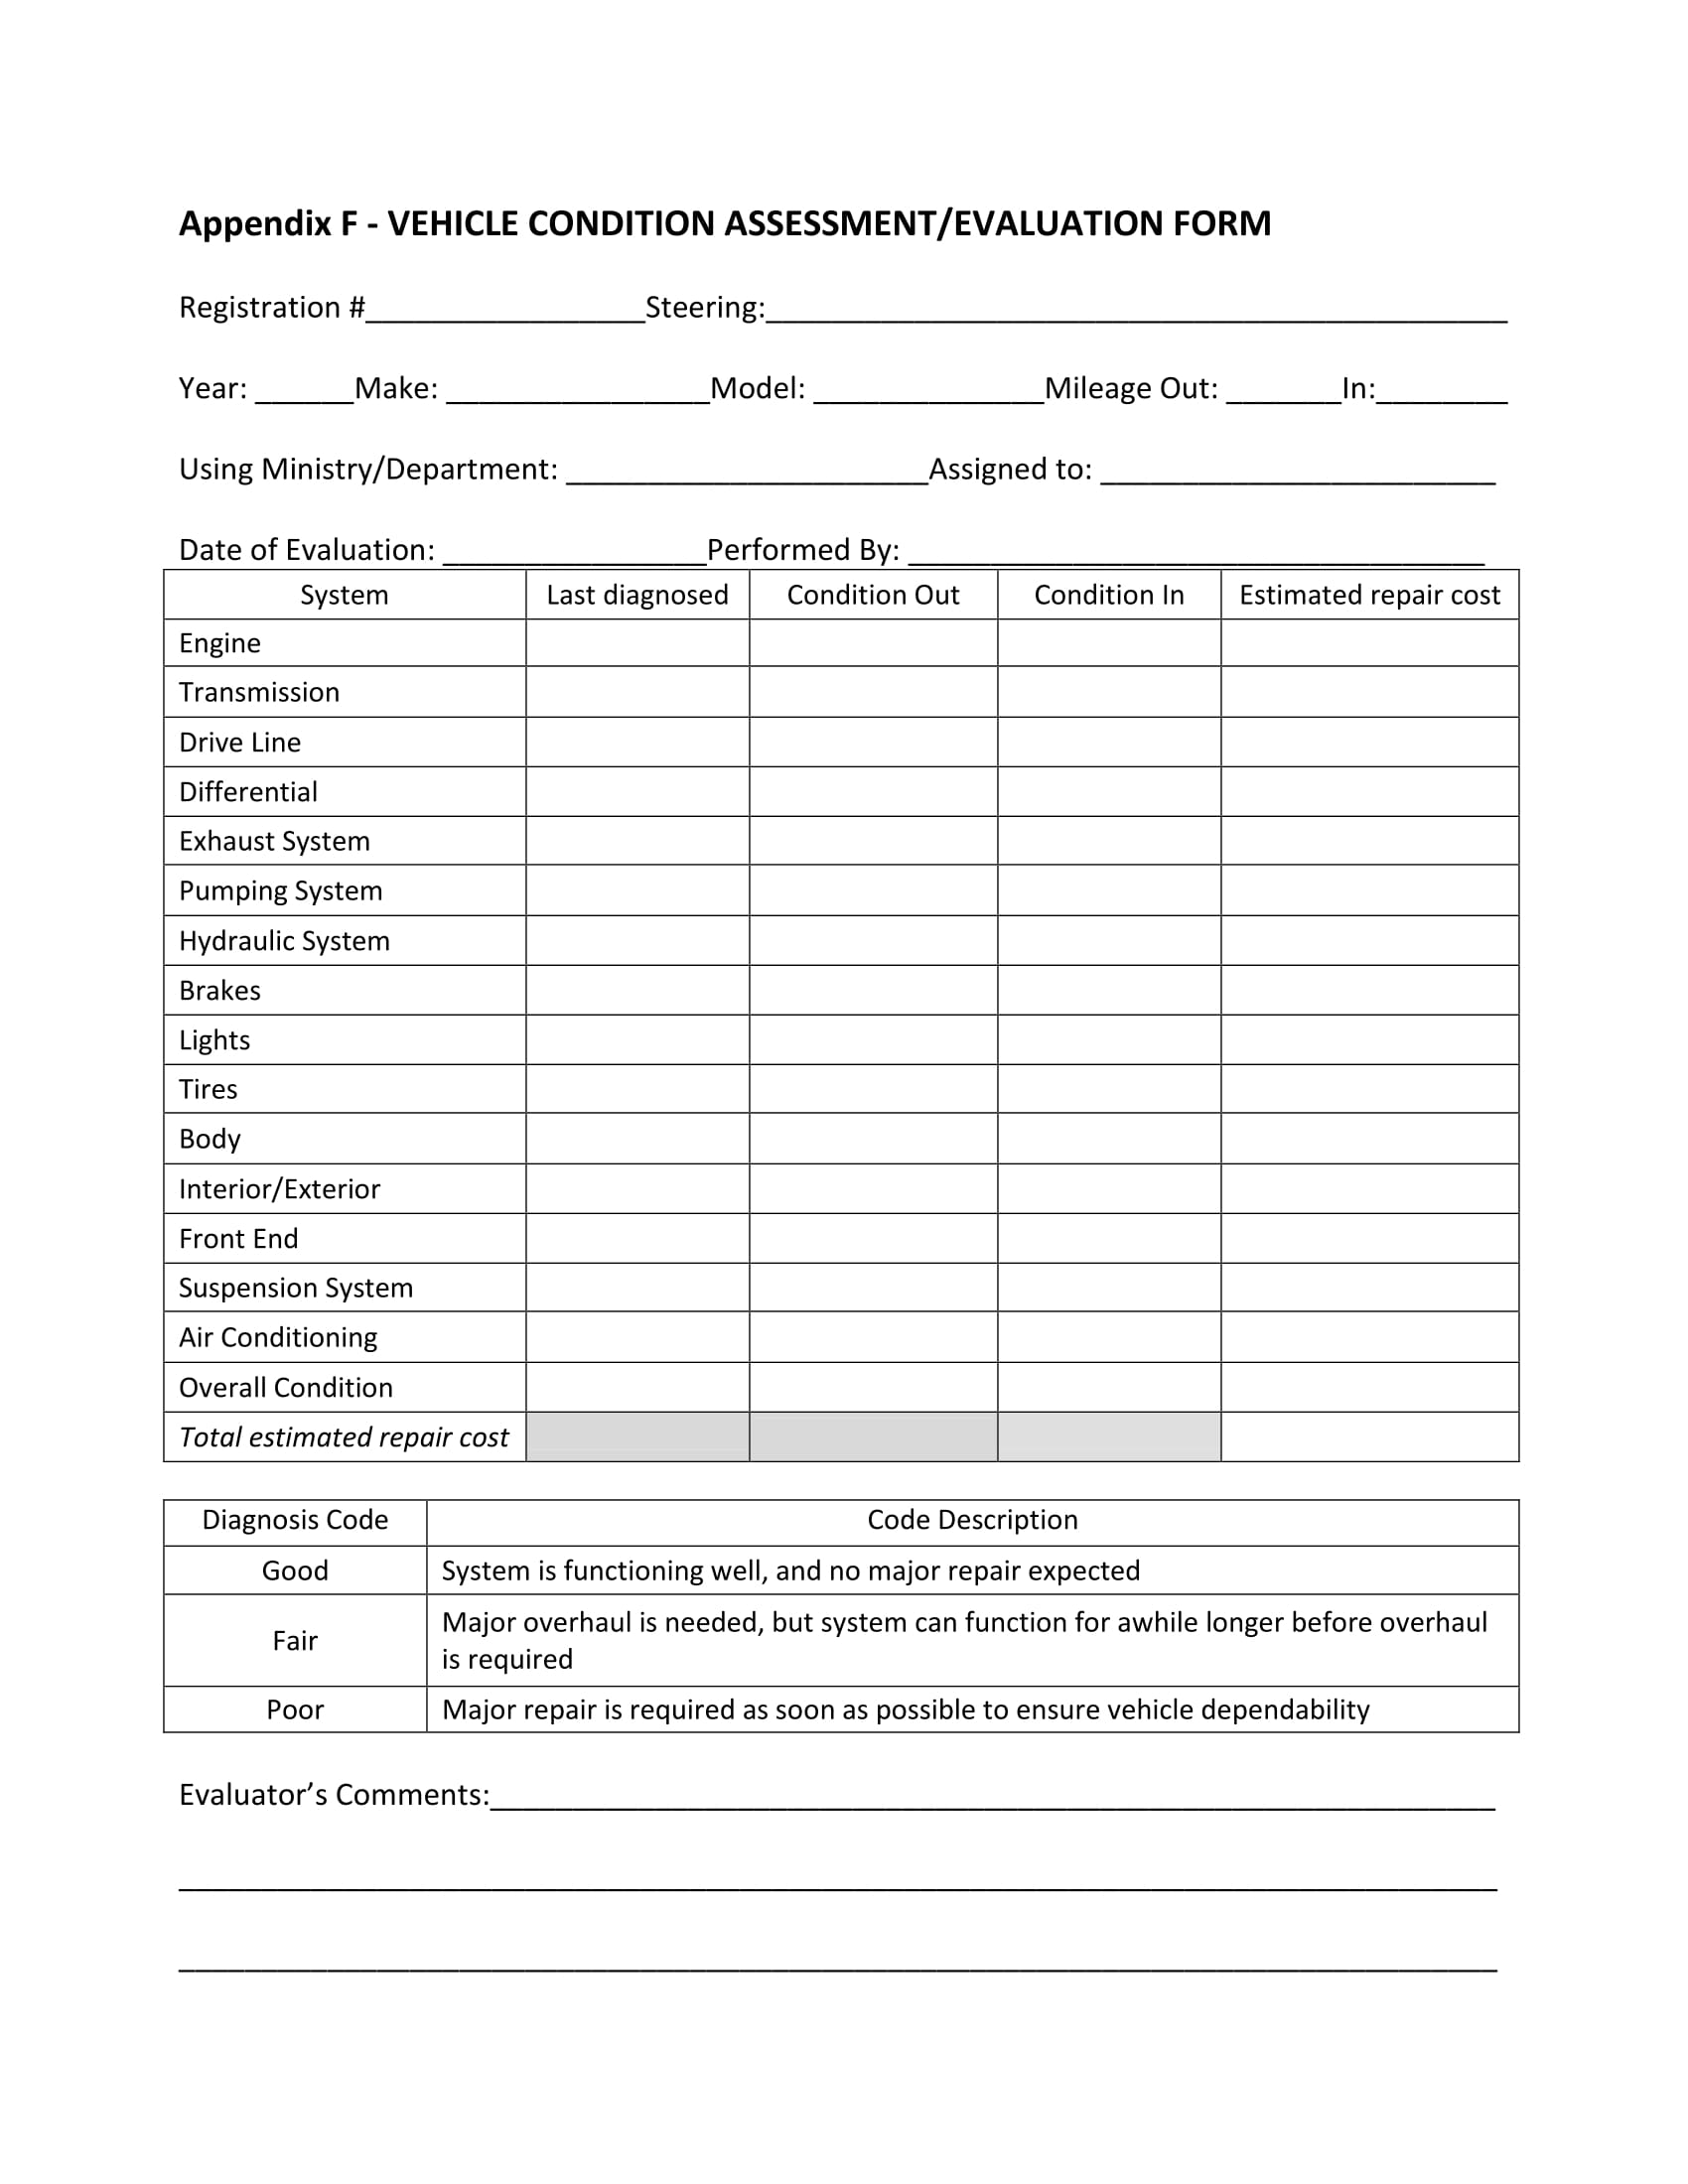 FREE 22+ Vehicle Evaluation Forms in PDF Within Property Condition Assessment Report Template